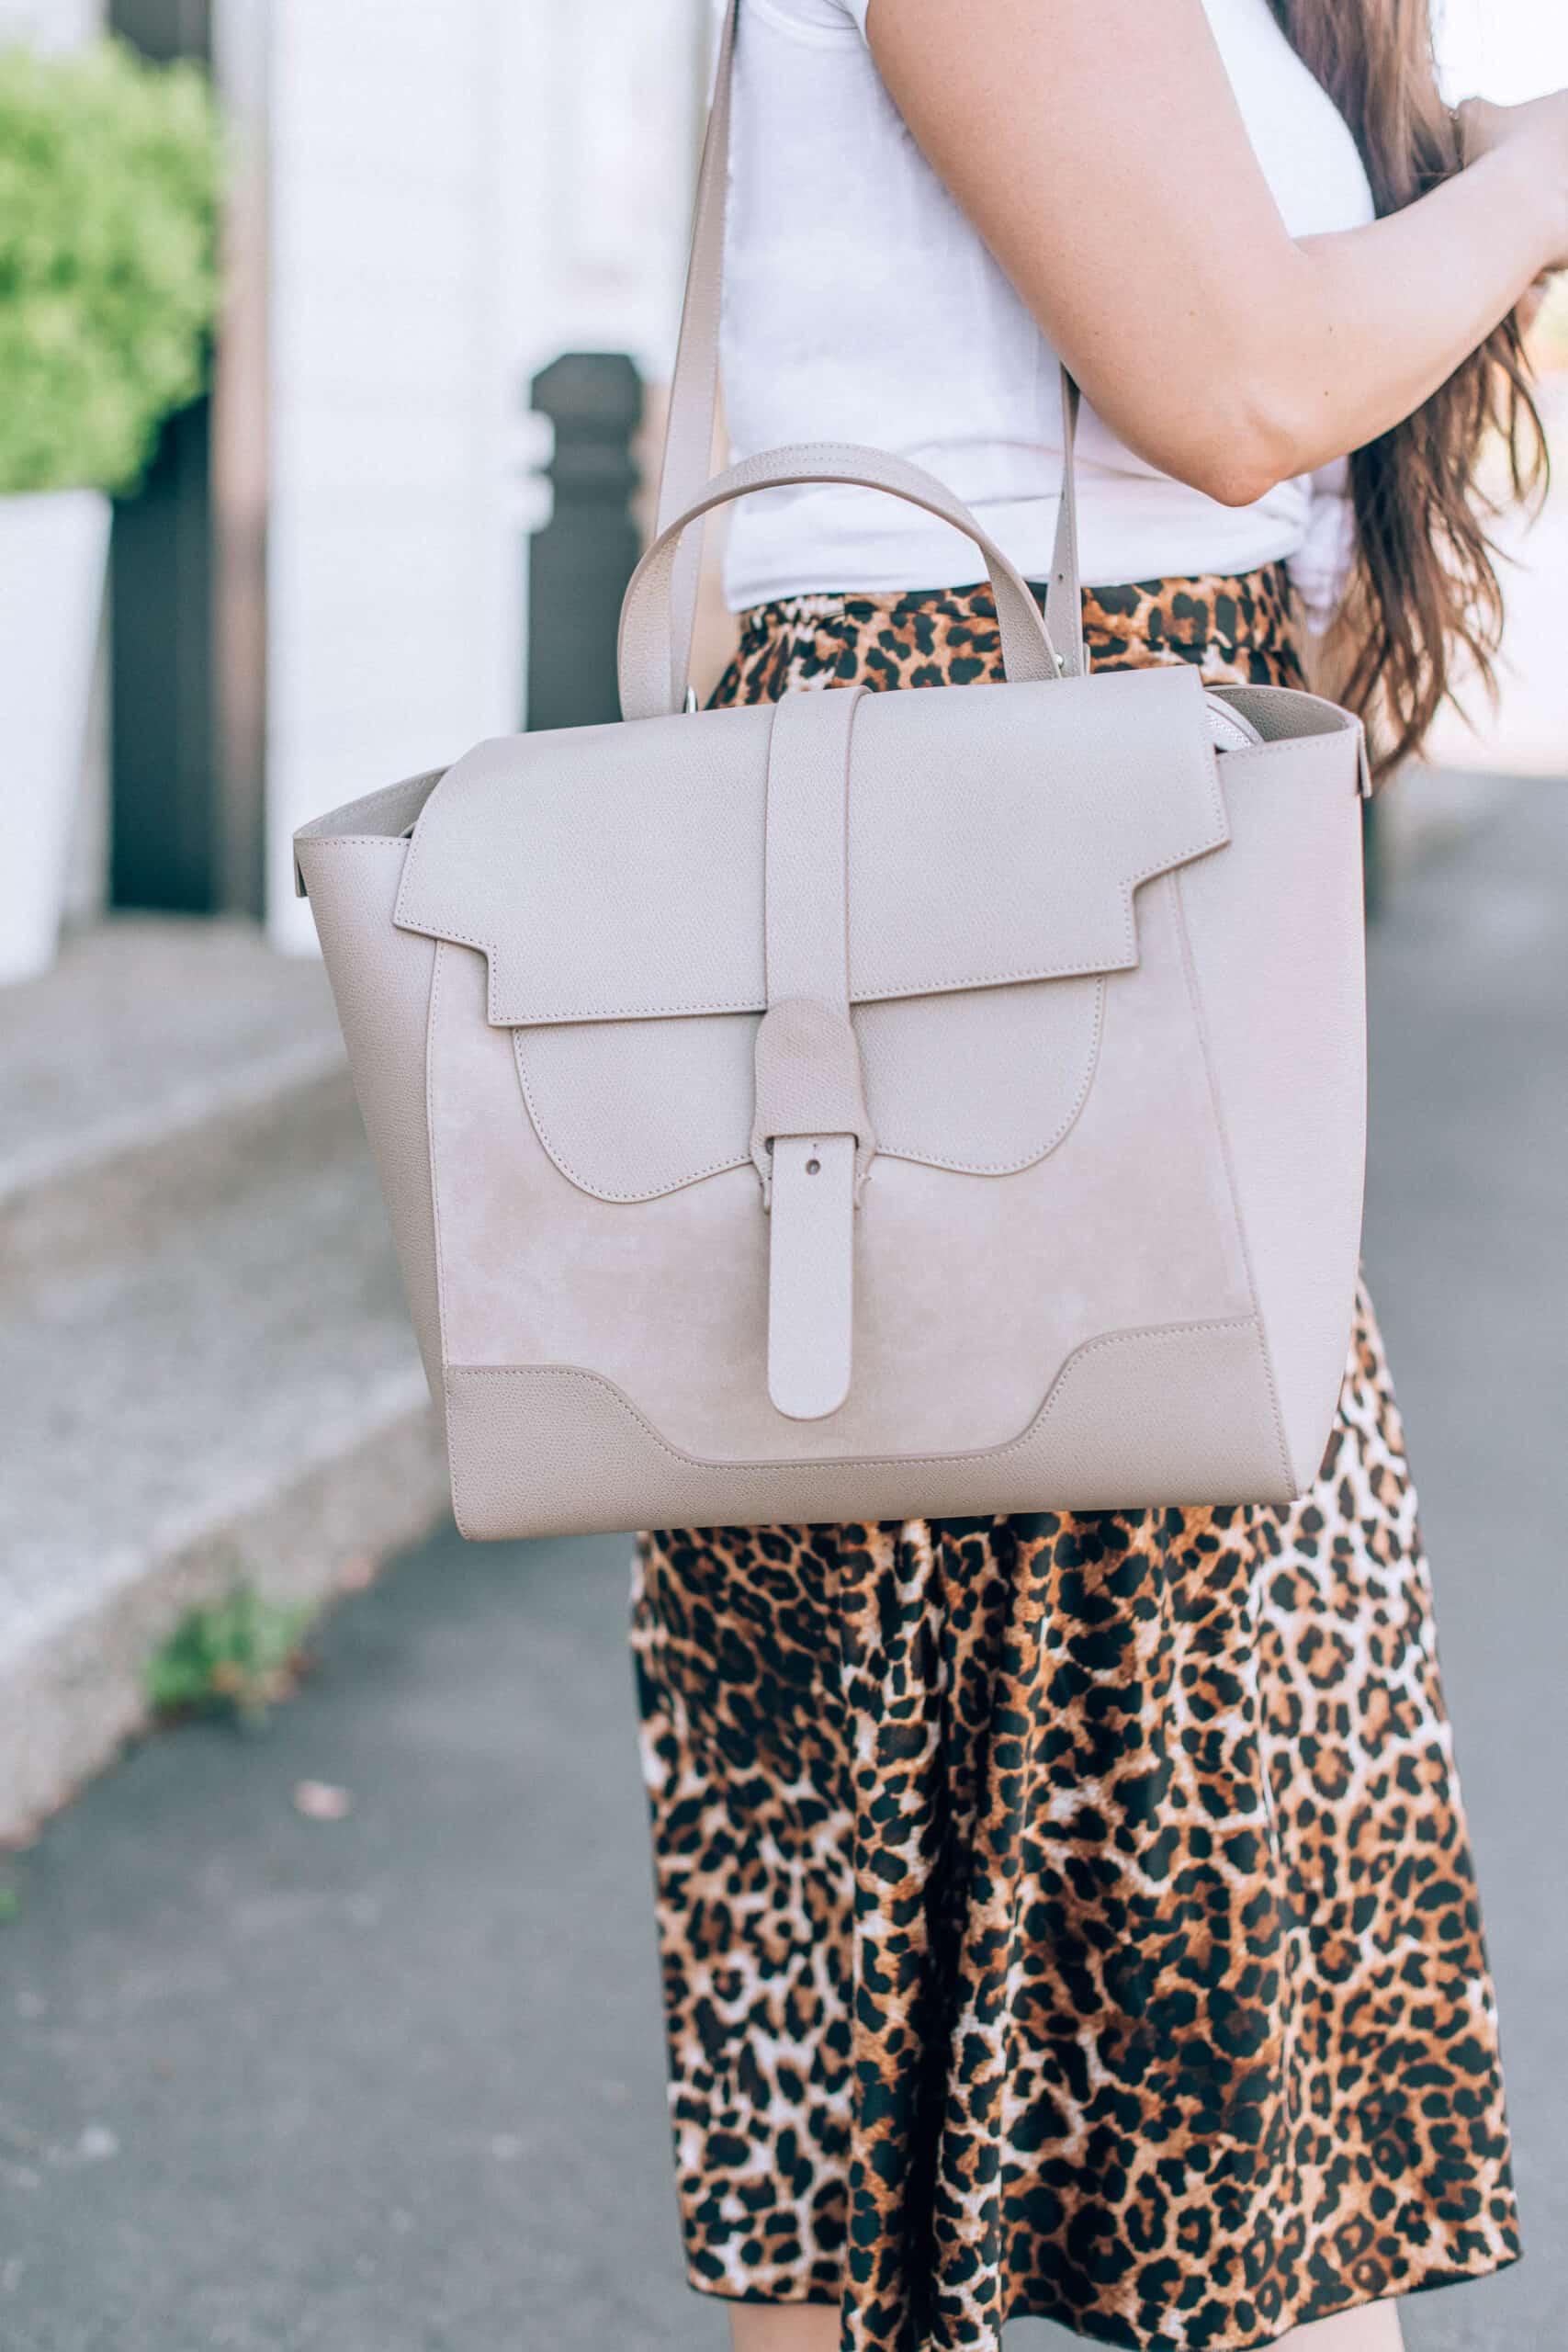 Top Celine bag dupes, by fashion blogger What The Fab